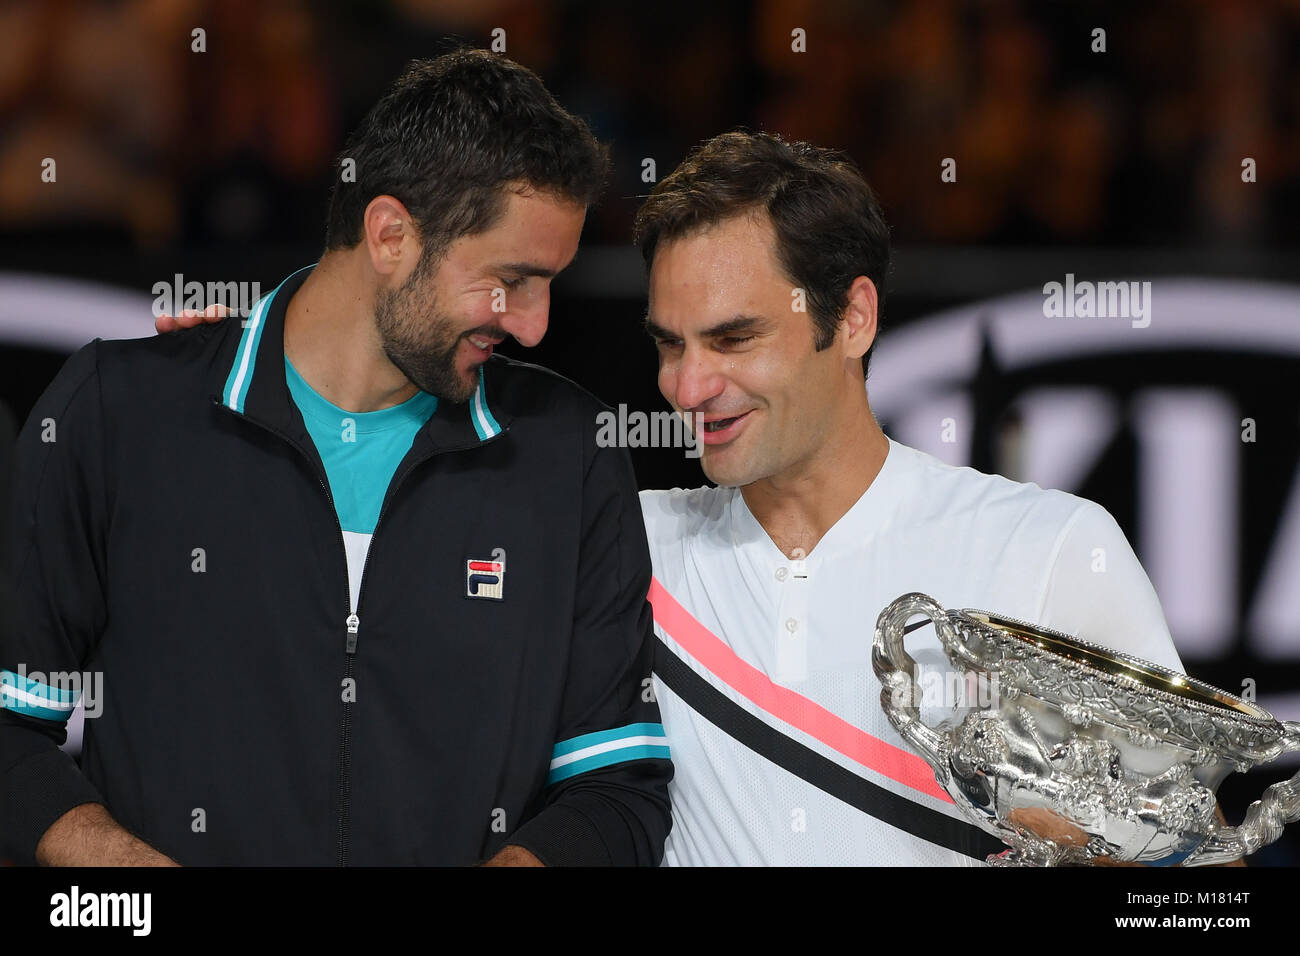 Melbourne, Australia. 28th Jan, 2018. Number two seed Roger Federer of Switzerland and number six seed Marin Cilic of Croatia share a moment during the presentation of trophies after Federer won the Men's Final against on day fourteen of the 2018 Australian Open Grand Slam tennis tournament in Melbourne, Australia. Federer won 3 sets to 2. Sydney Low/Cal Sport Media/Alamy Live News Stock Photo